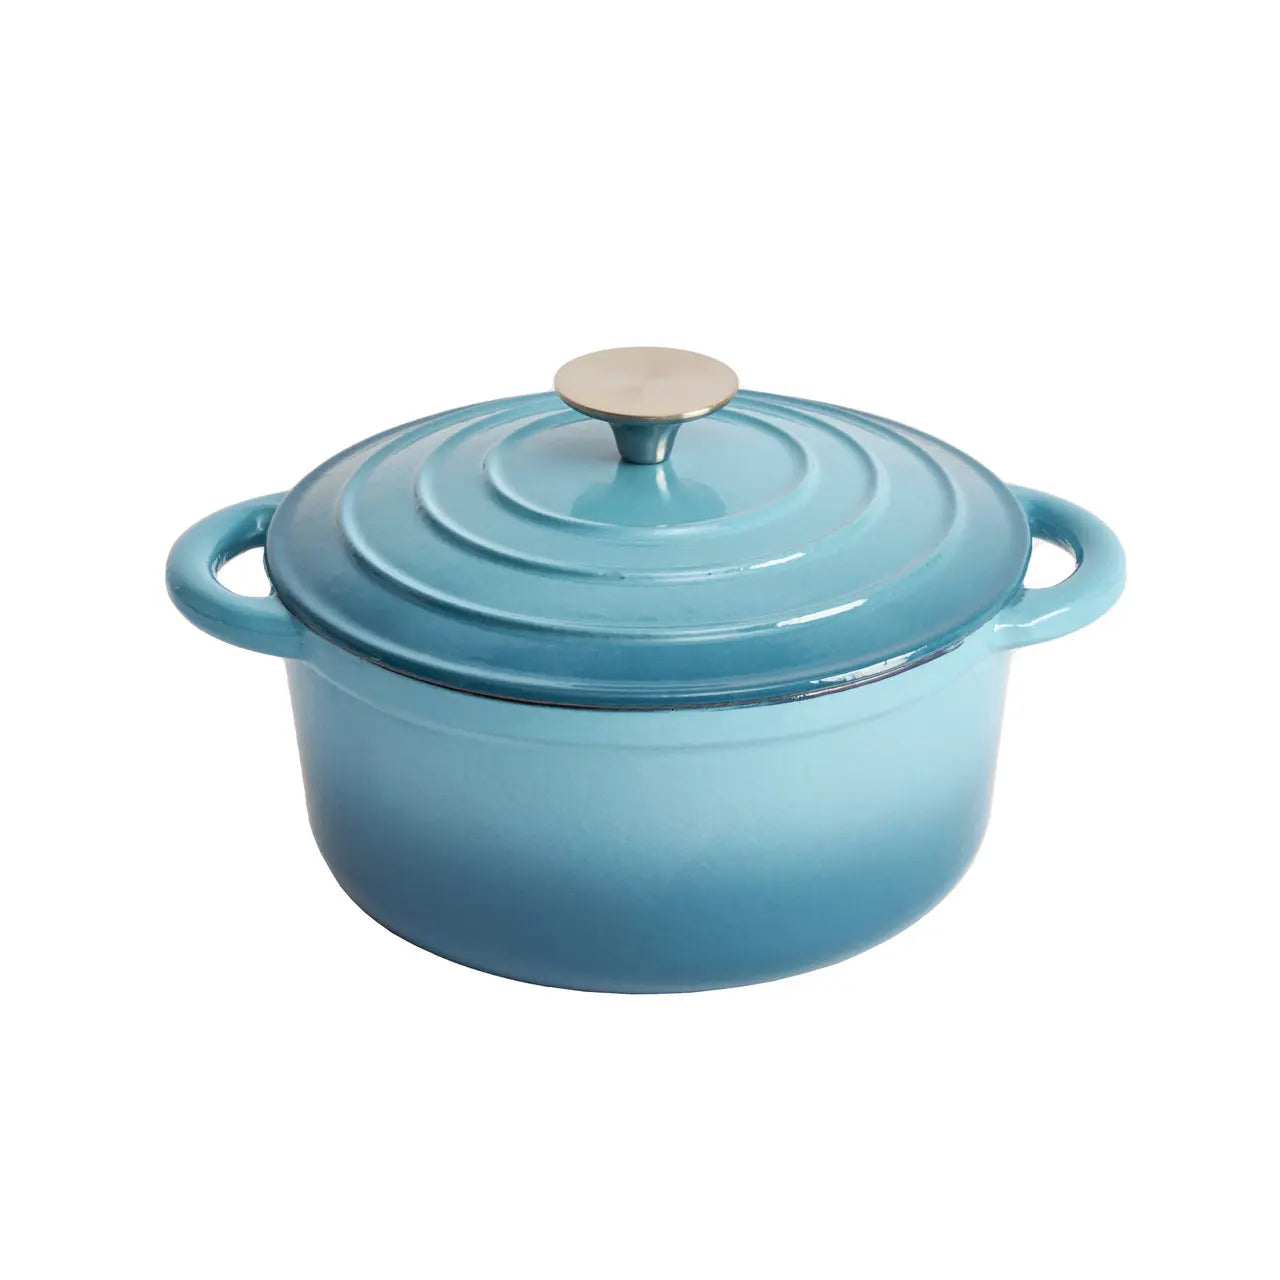 Enameled Cast Iron 8 1/4 inch Round Dutch Oven in Agave